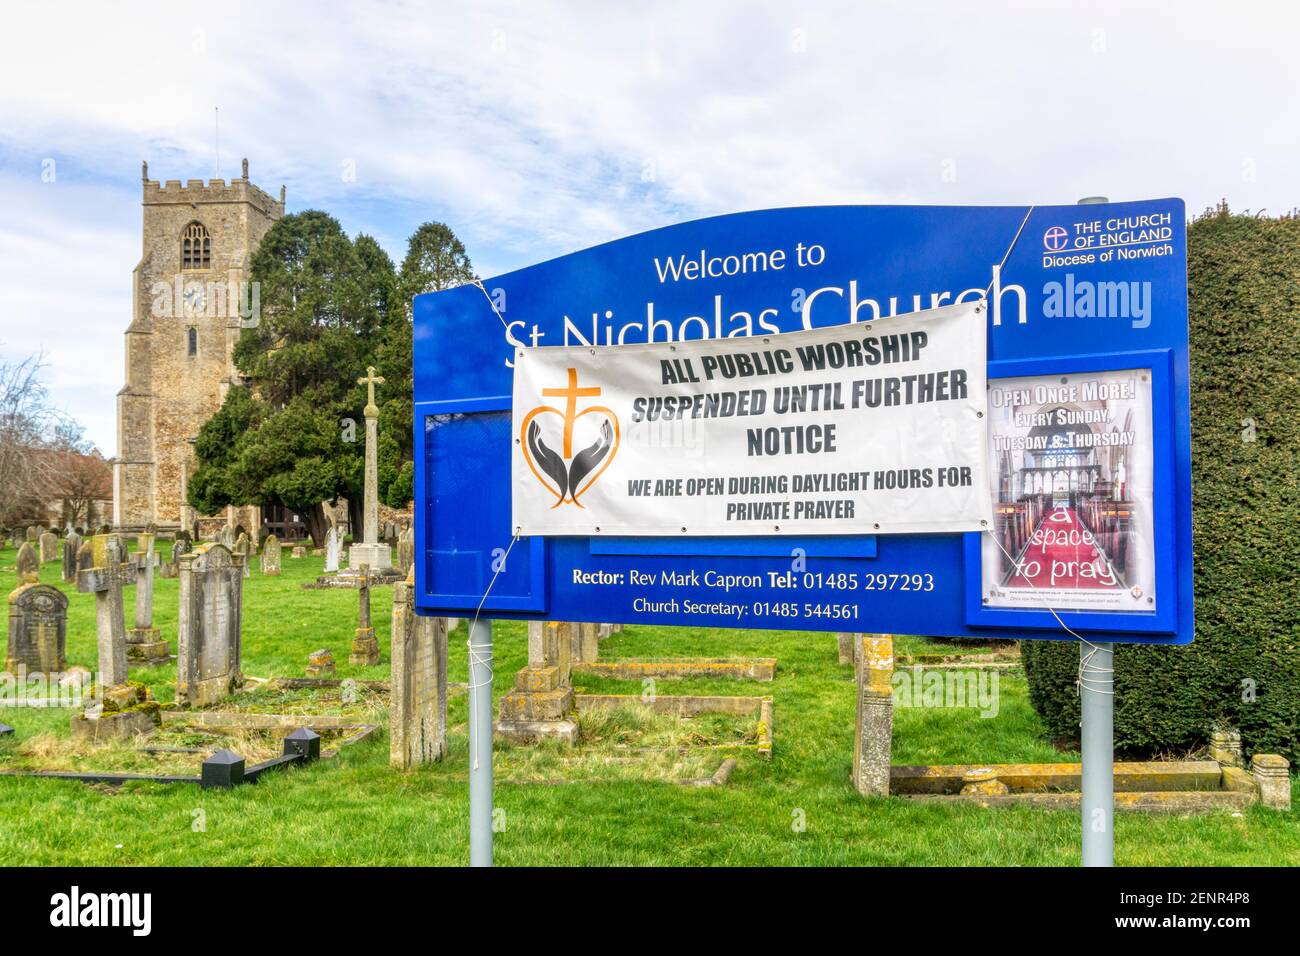 All Public Worship Suspended Until Further Notice sign outside village church in Norfolk. Stock Photo